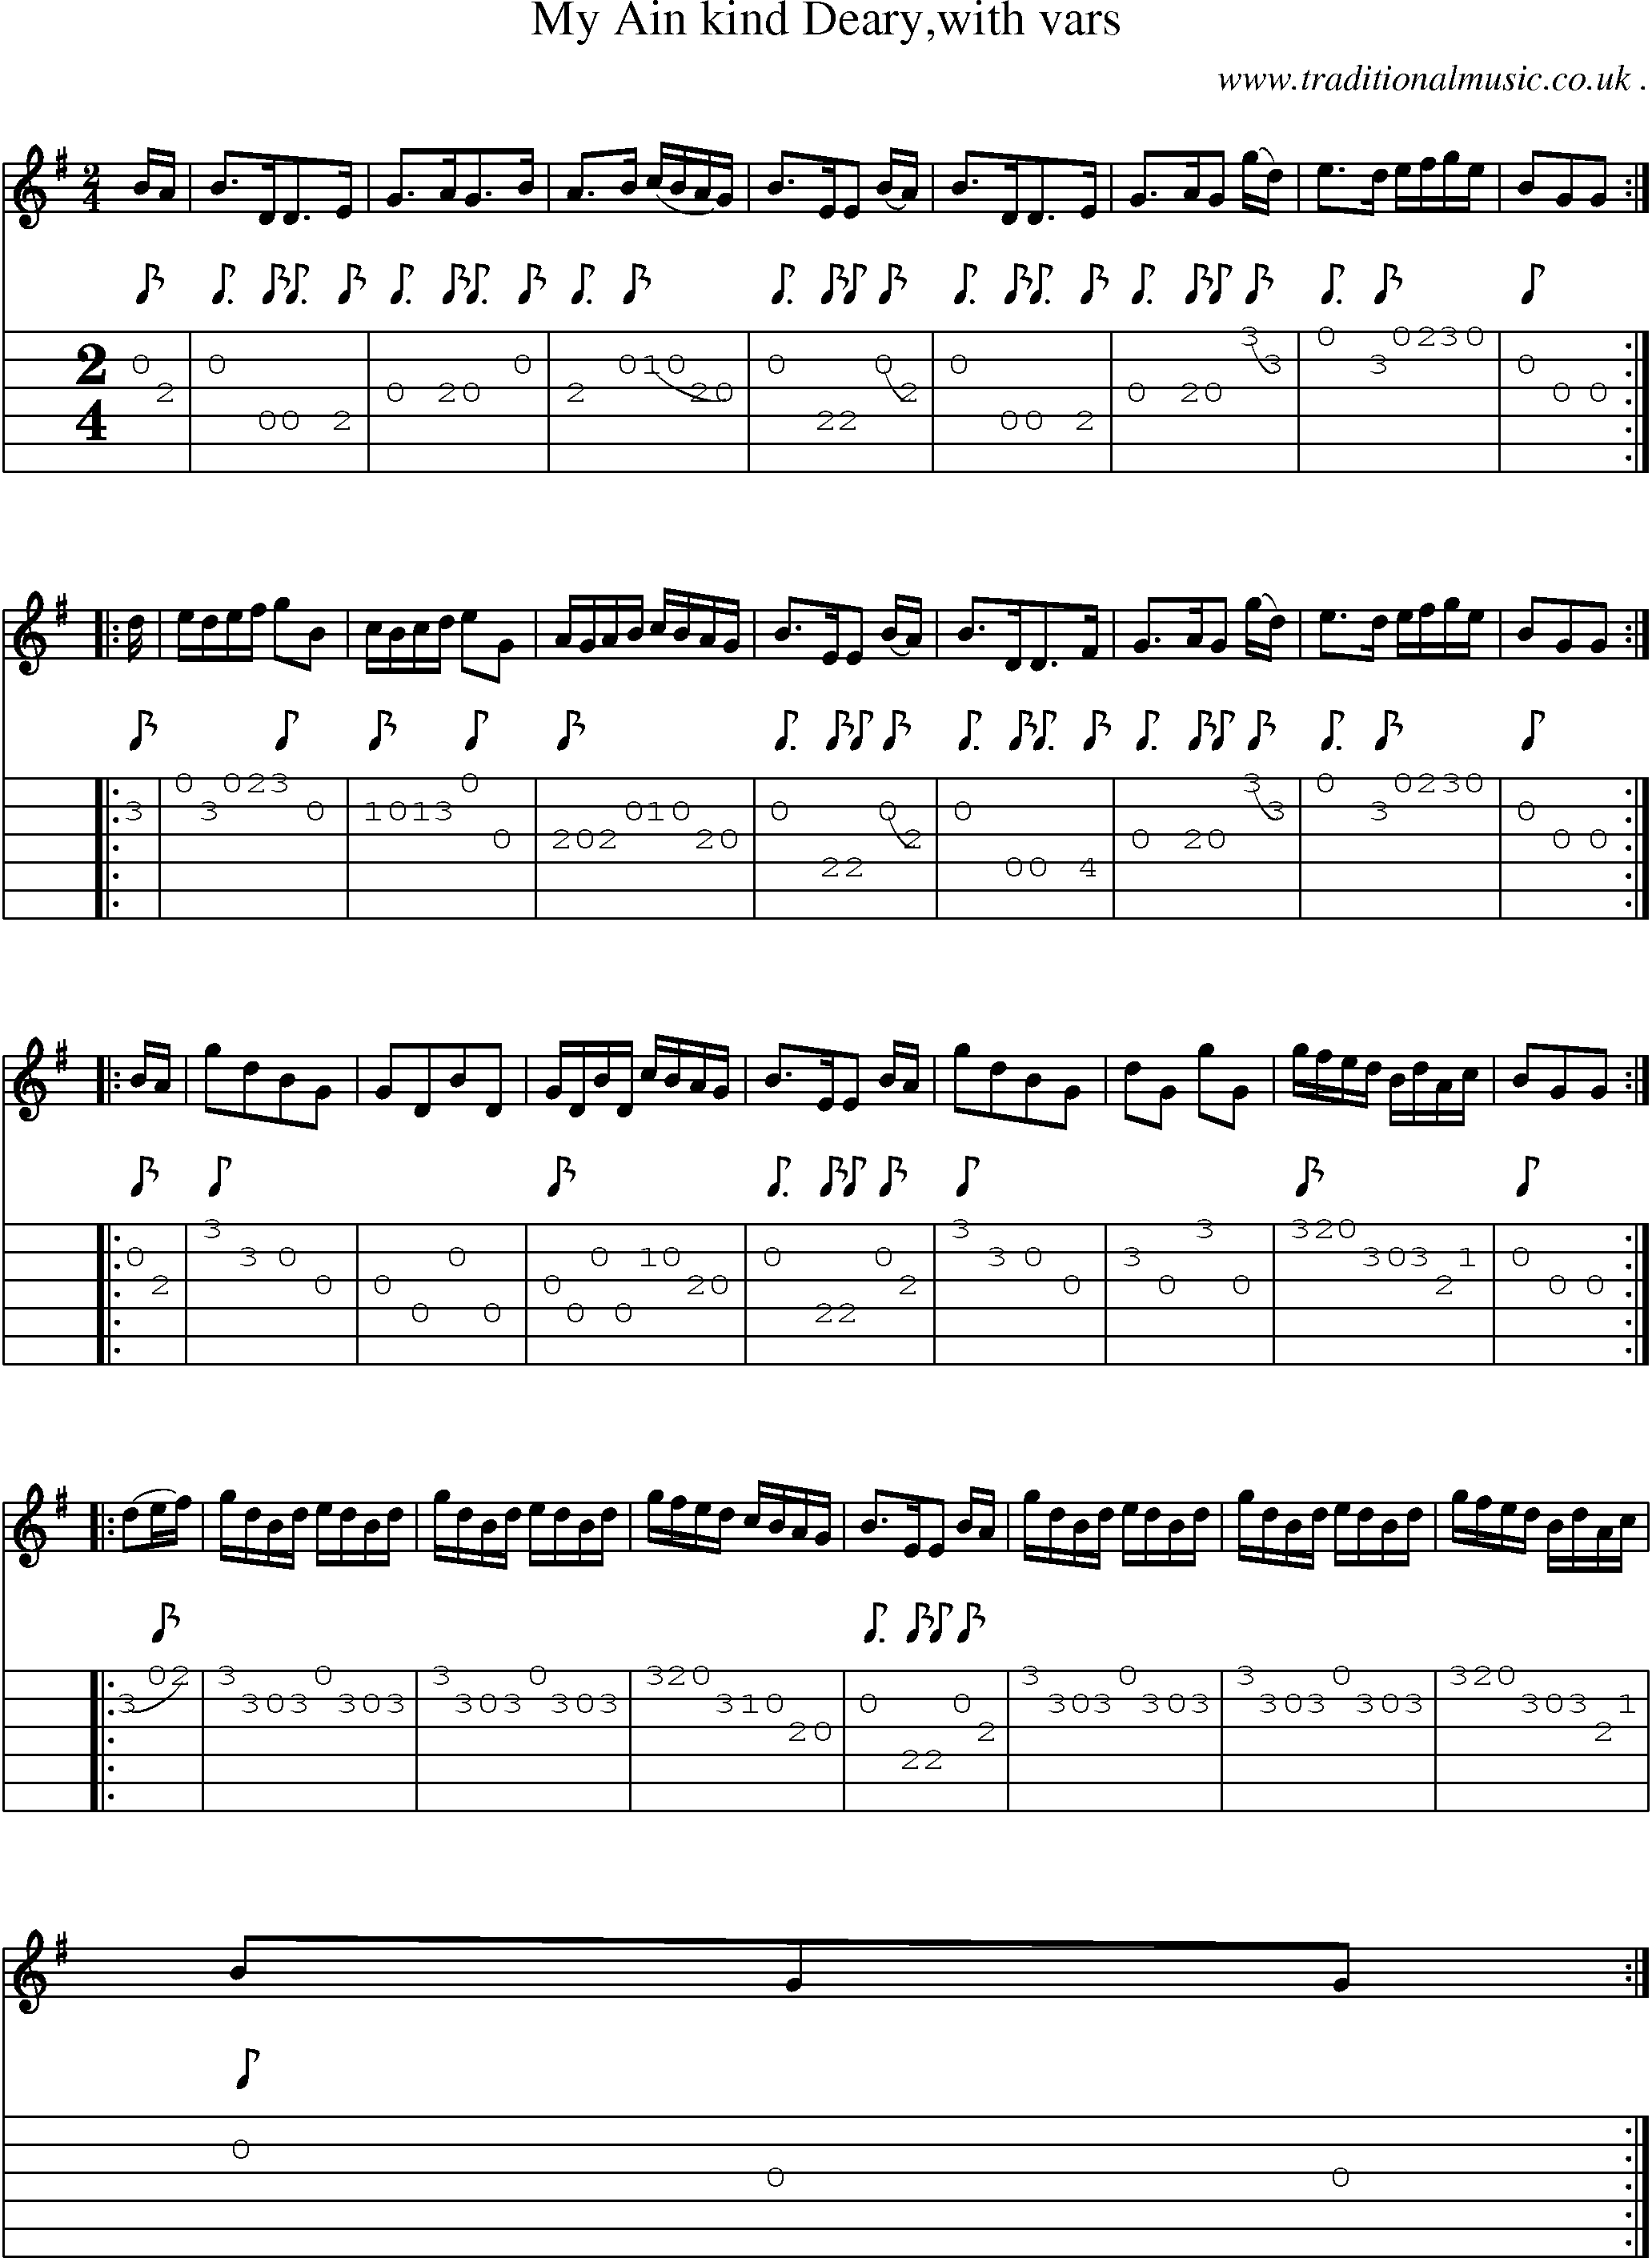 Sheet-Music and Guitar Tabs for My Ain Kind Dearywith Vars